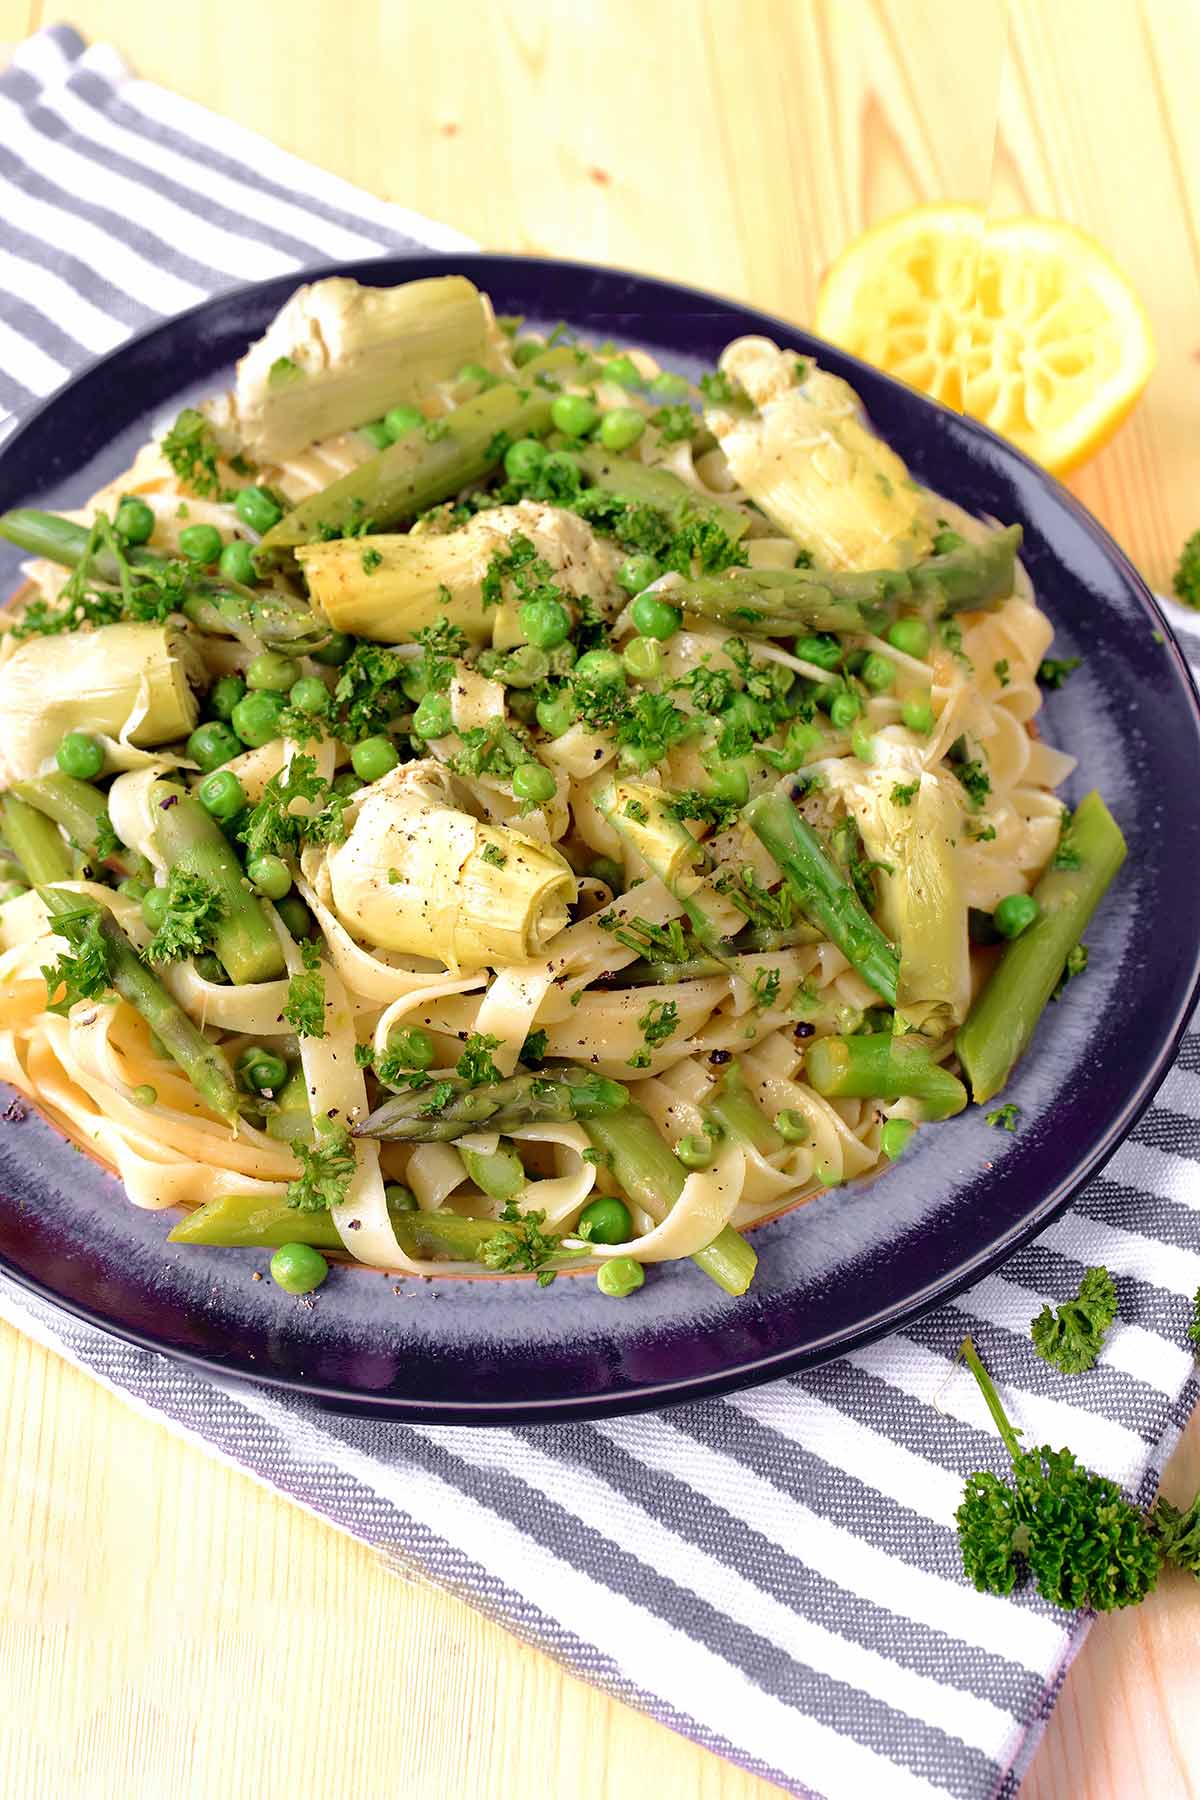 A plate of pasta mixed with green vegetables.